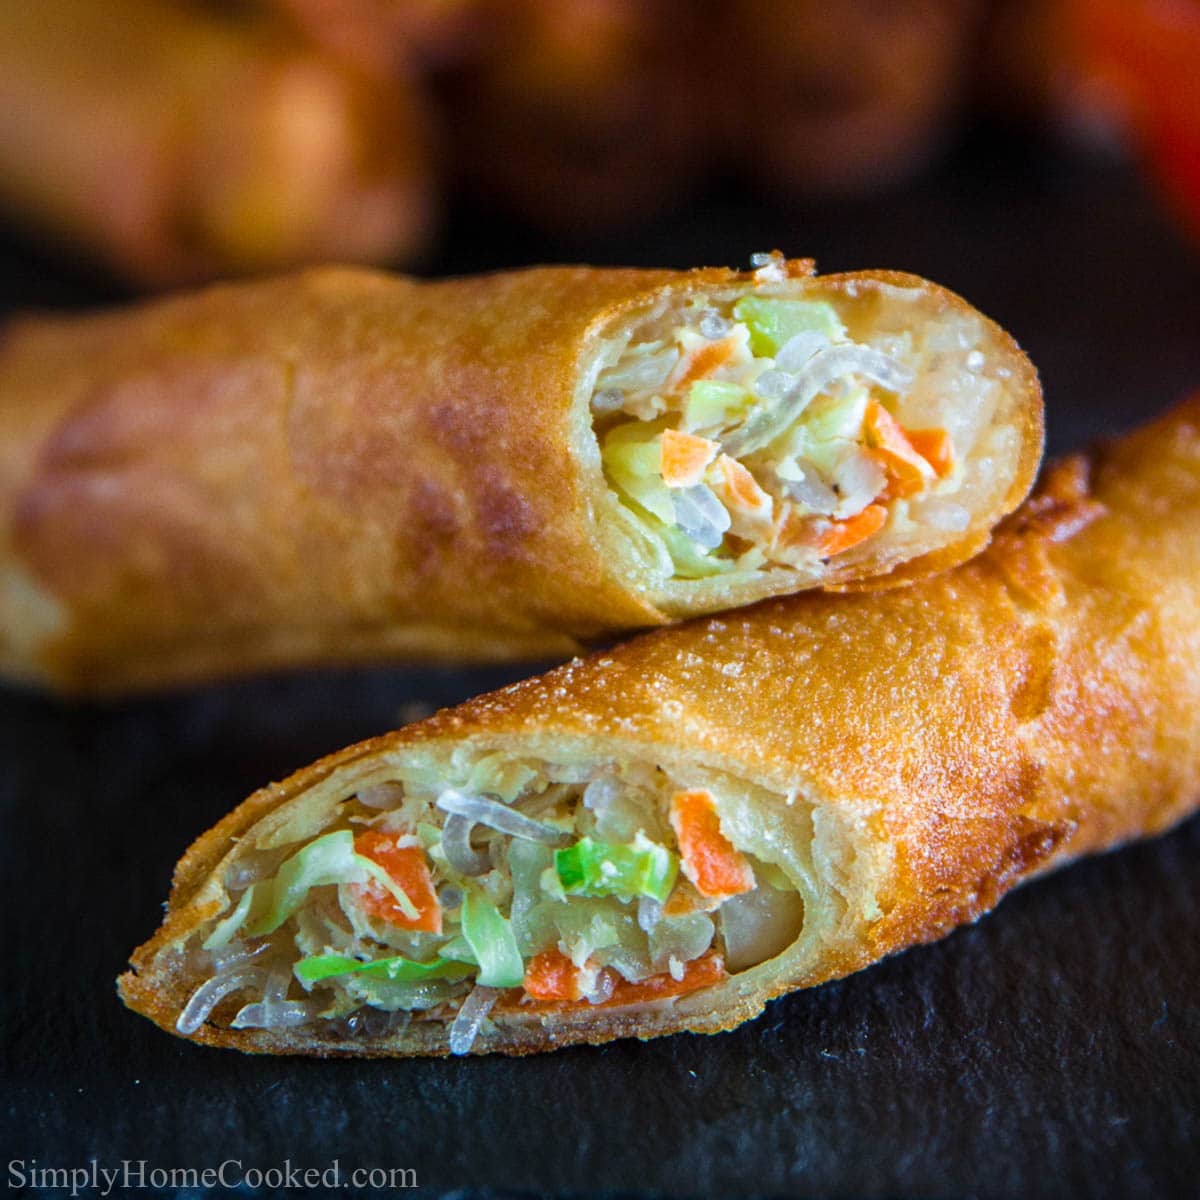 https://simplyhomecooked.com/wp-content/uploads/2022/05/fried-spring-rolls-3.jpg